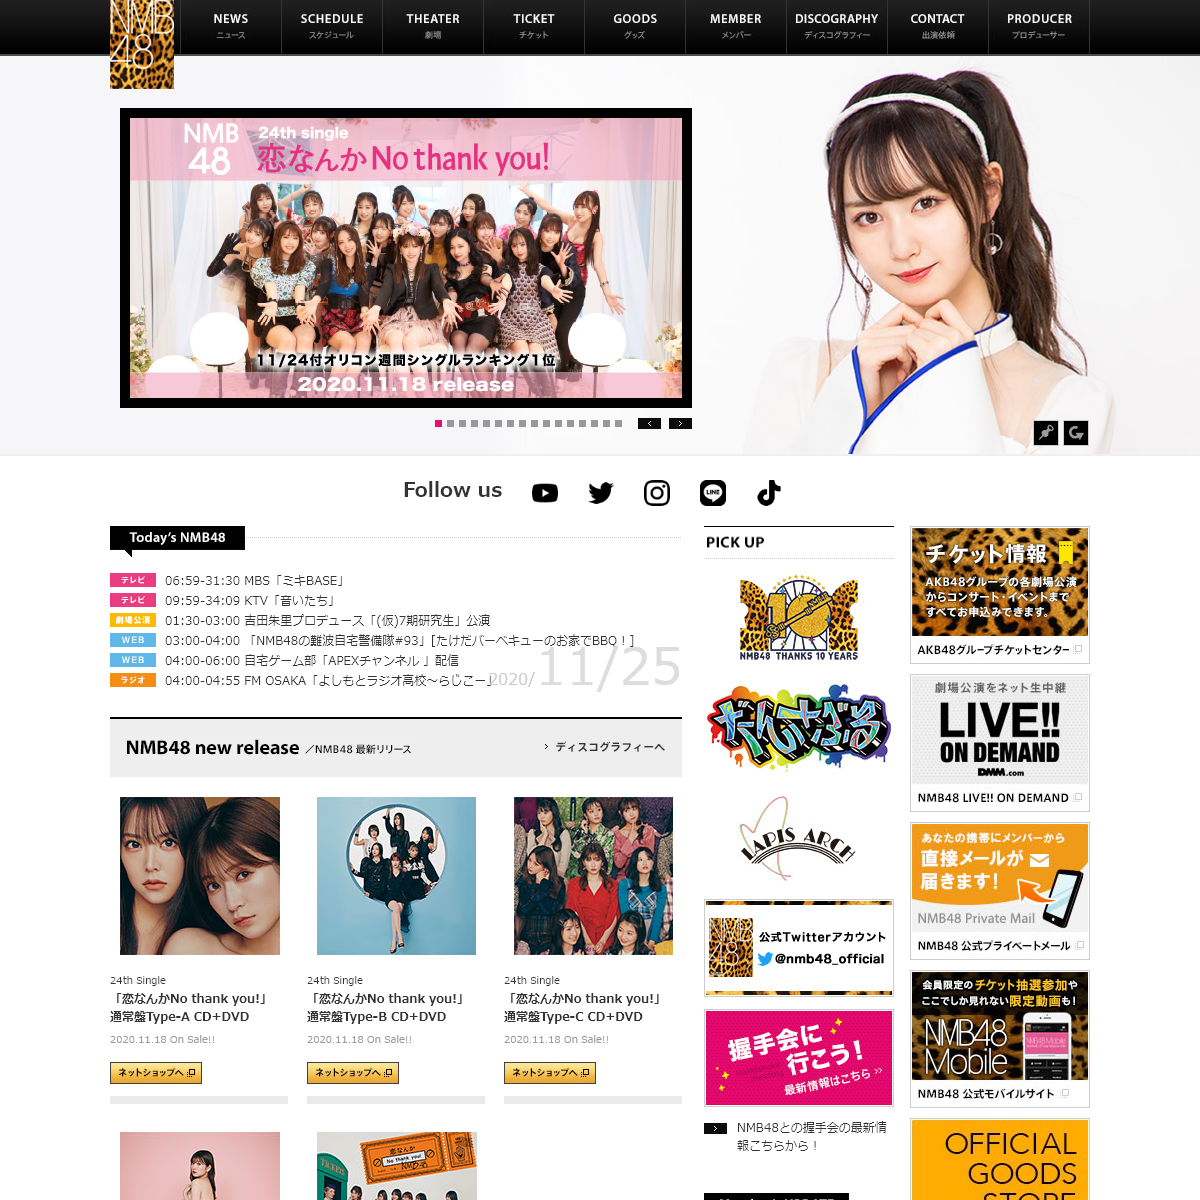 A complete backup of nmb48.com